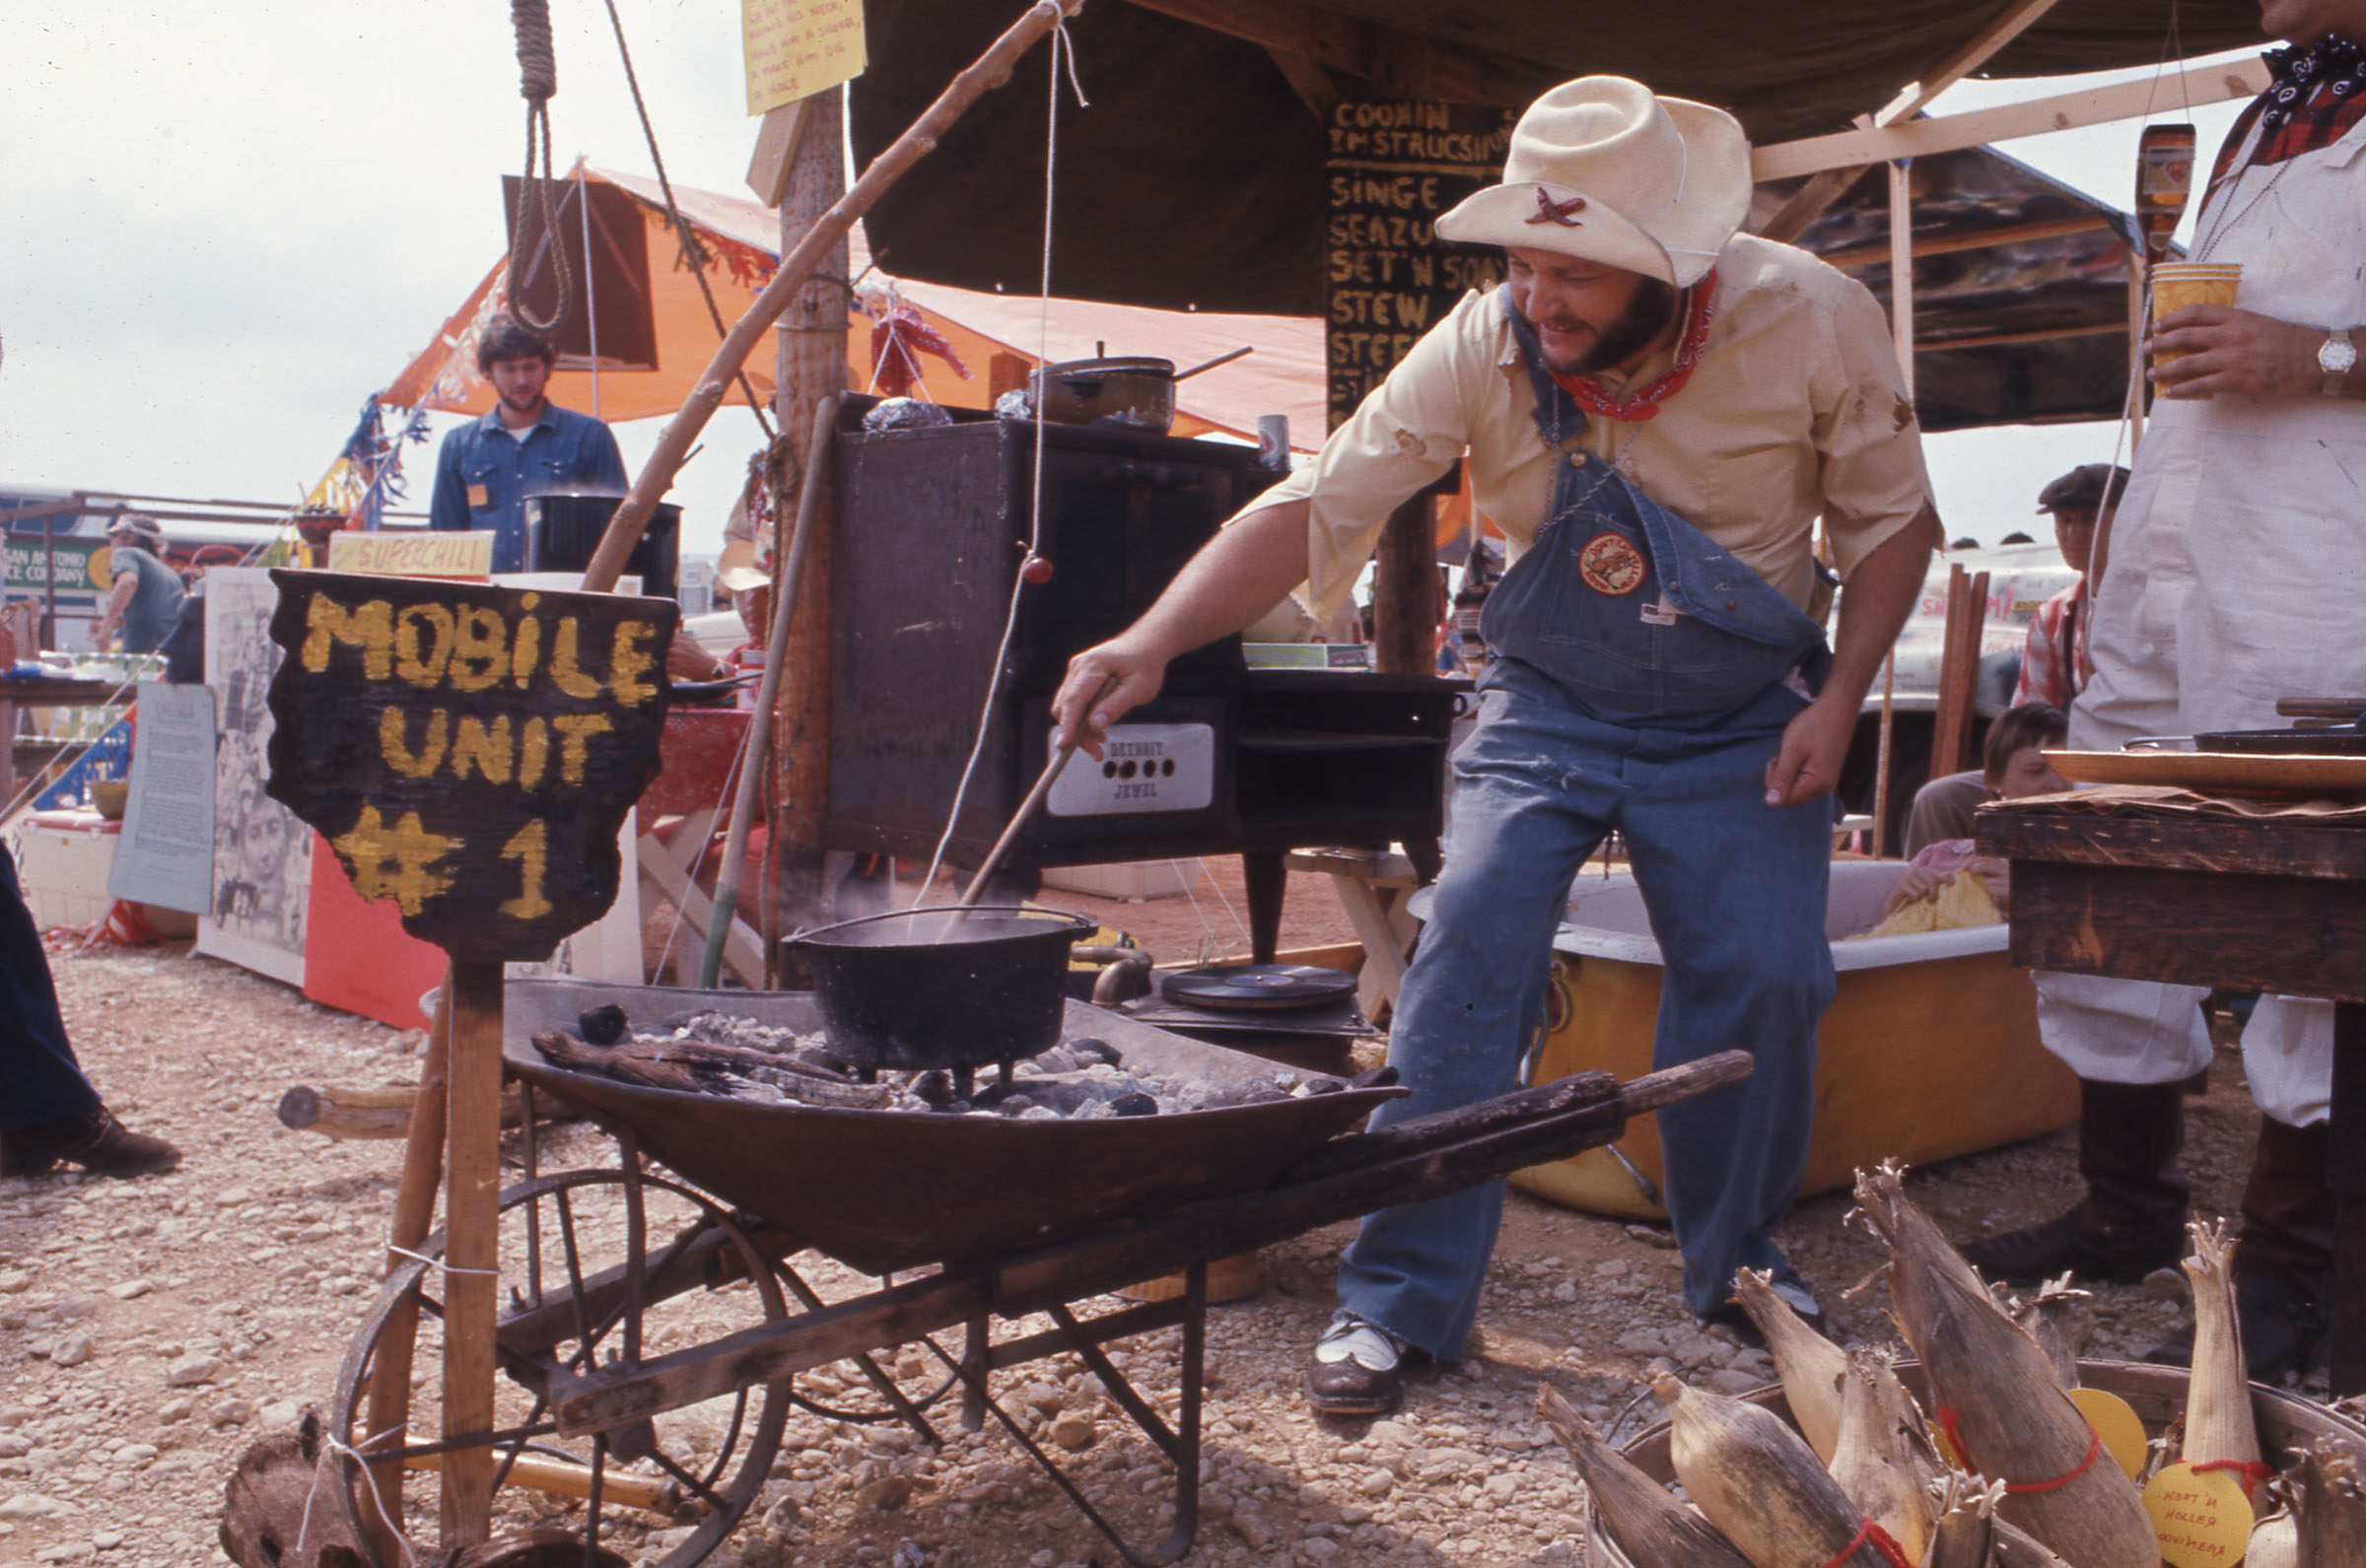 A vintage photo of a man in a cowboy hat working over a fire and pot of chili